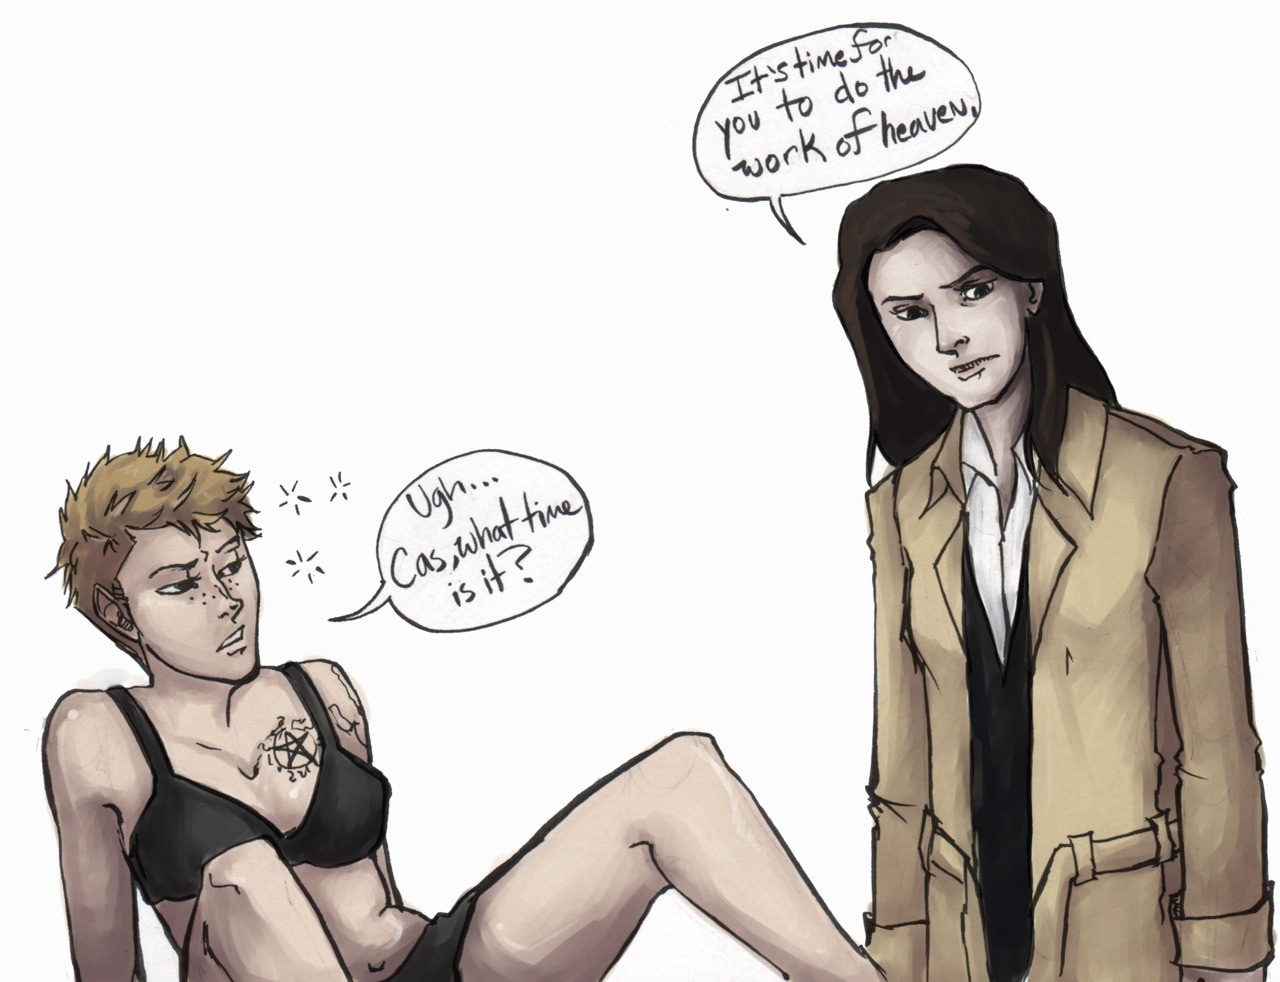 Quick doodle of genderbent Dean and Cas done during break at work, tried coloring